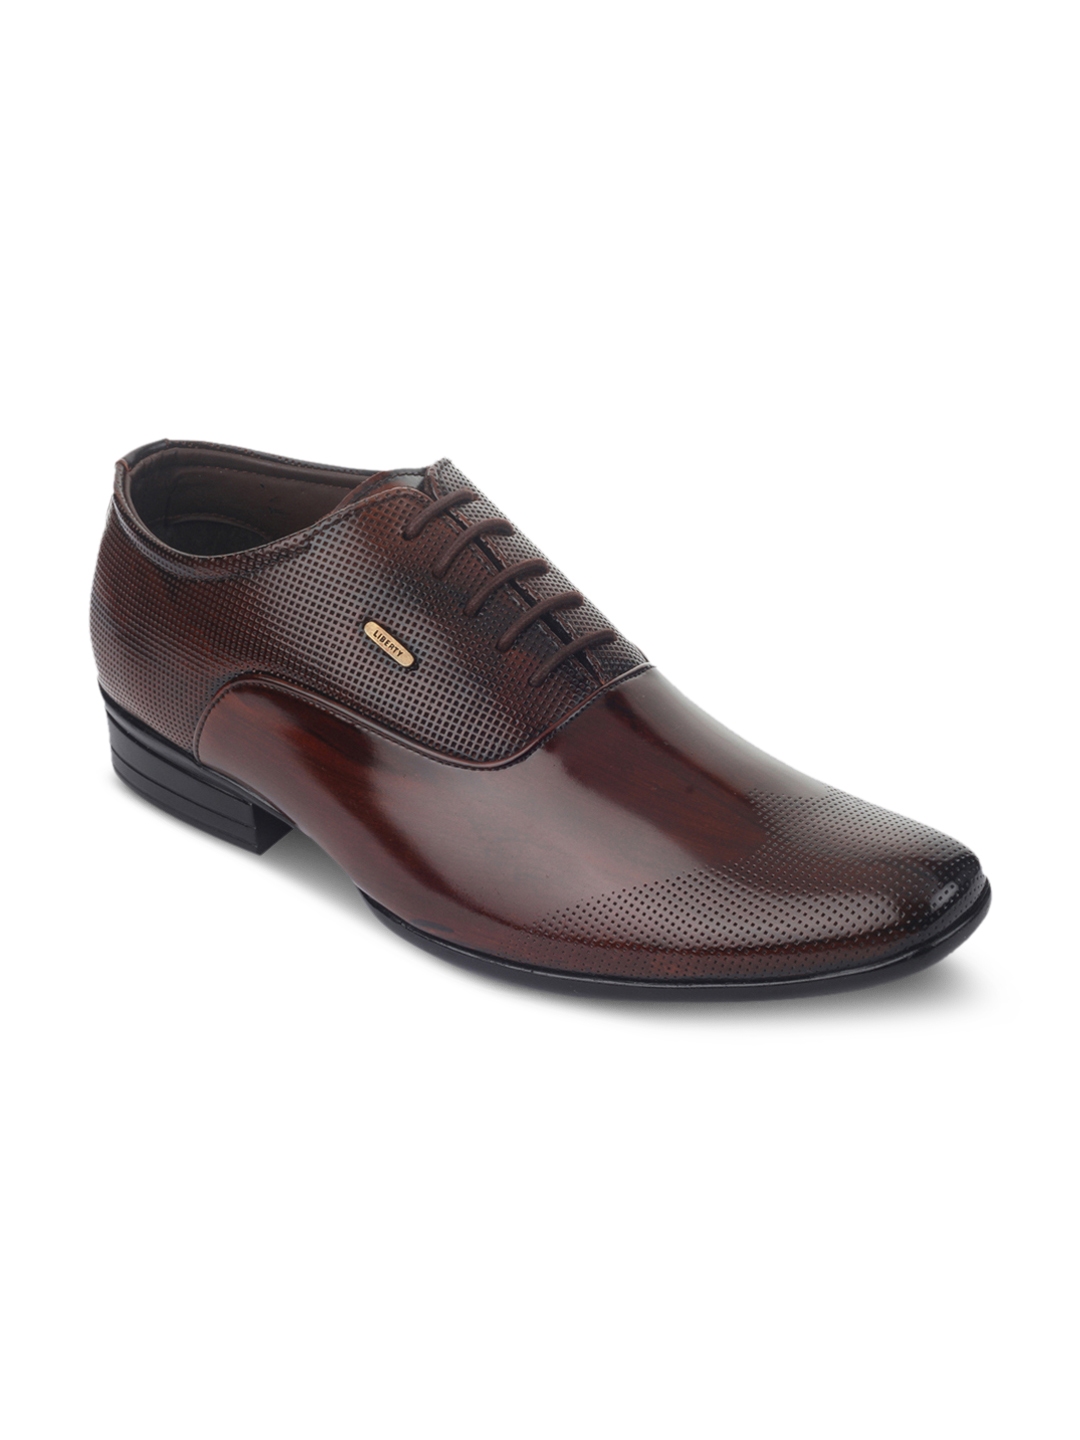 liberty shoes for mens formal